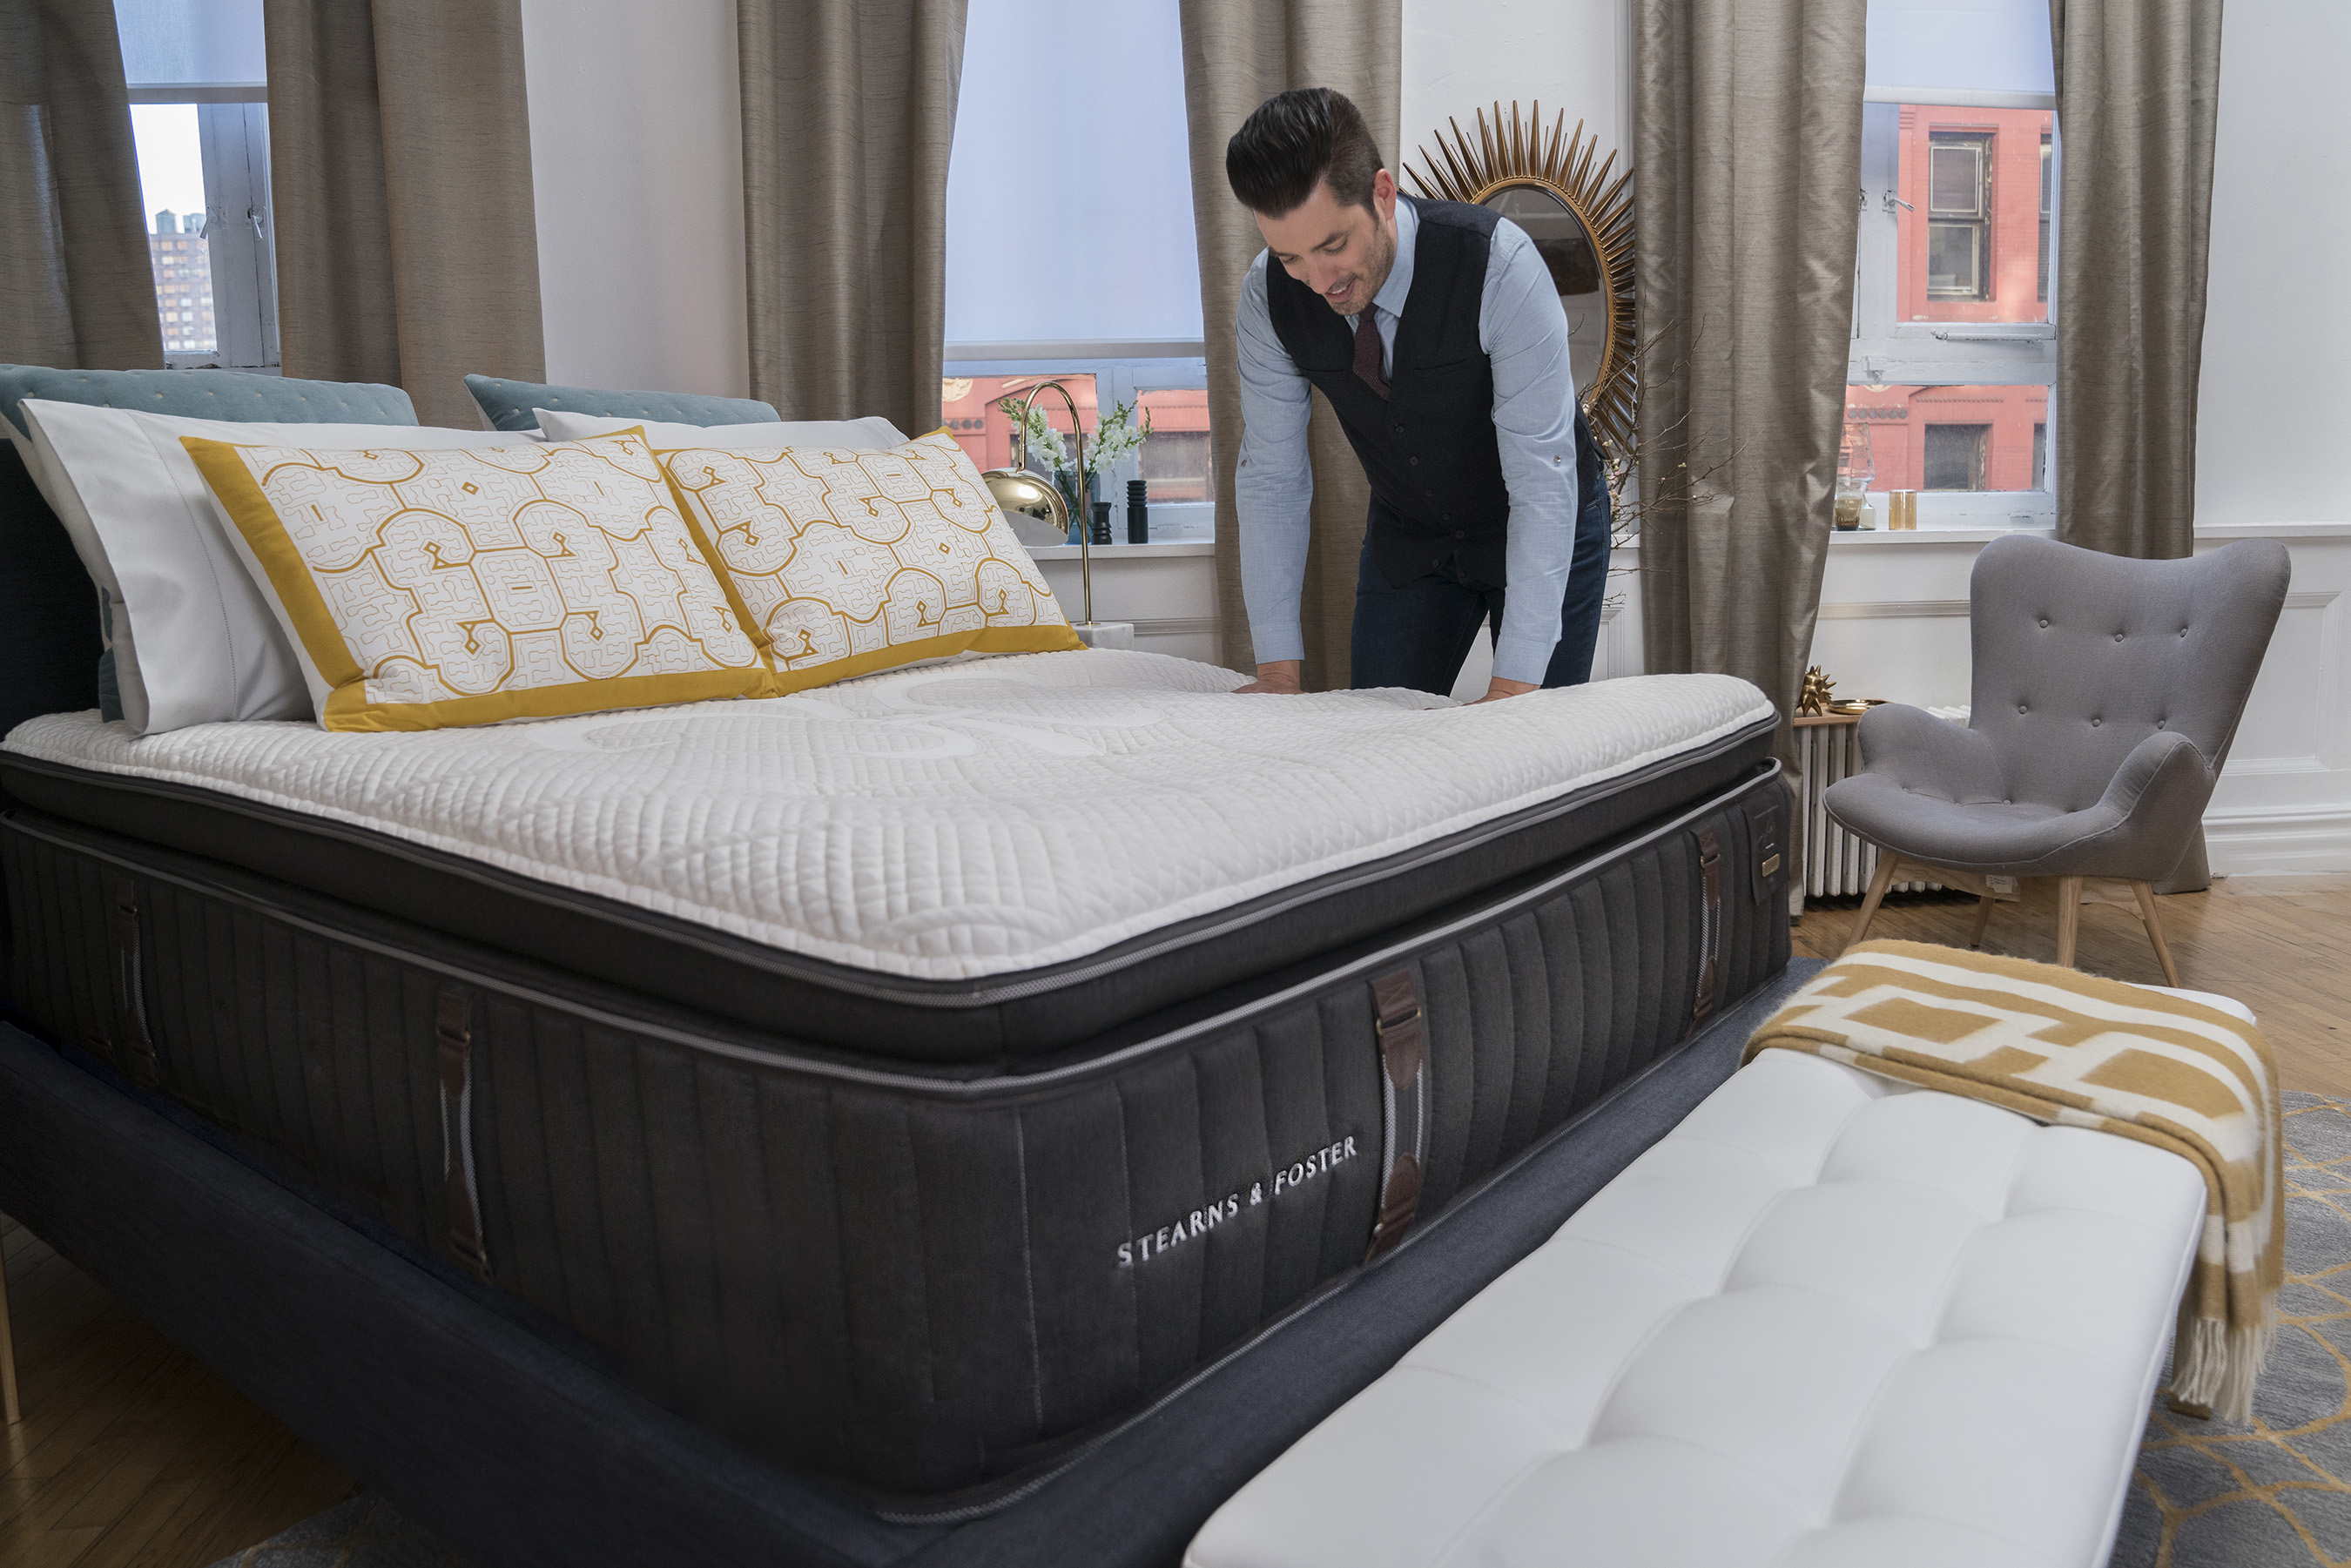 “One of the most important, most used pieces of furniture in the entire house is the mattress. That’s why I wanted to help consumers see that they can have comfort and personal style in one place that they’ll enjoy every night,” said Jonathan Scott, home design expert.